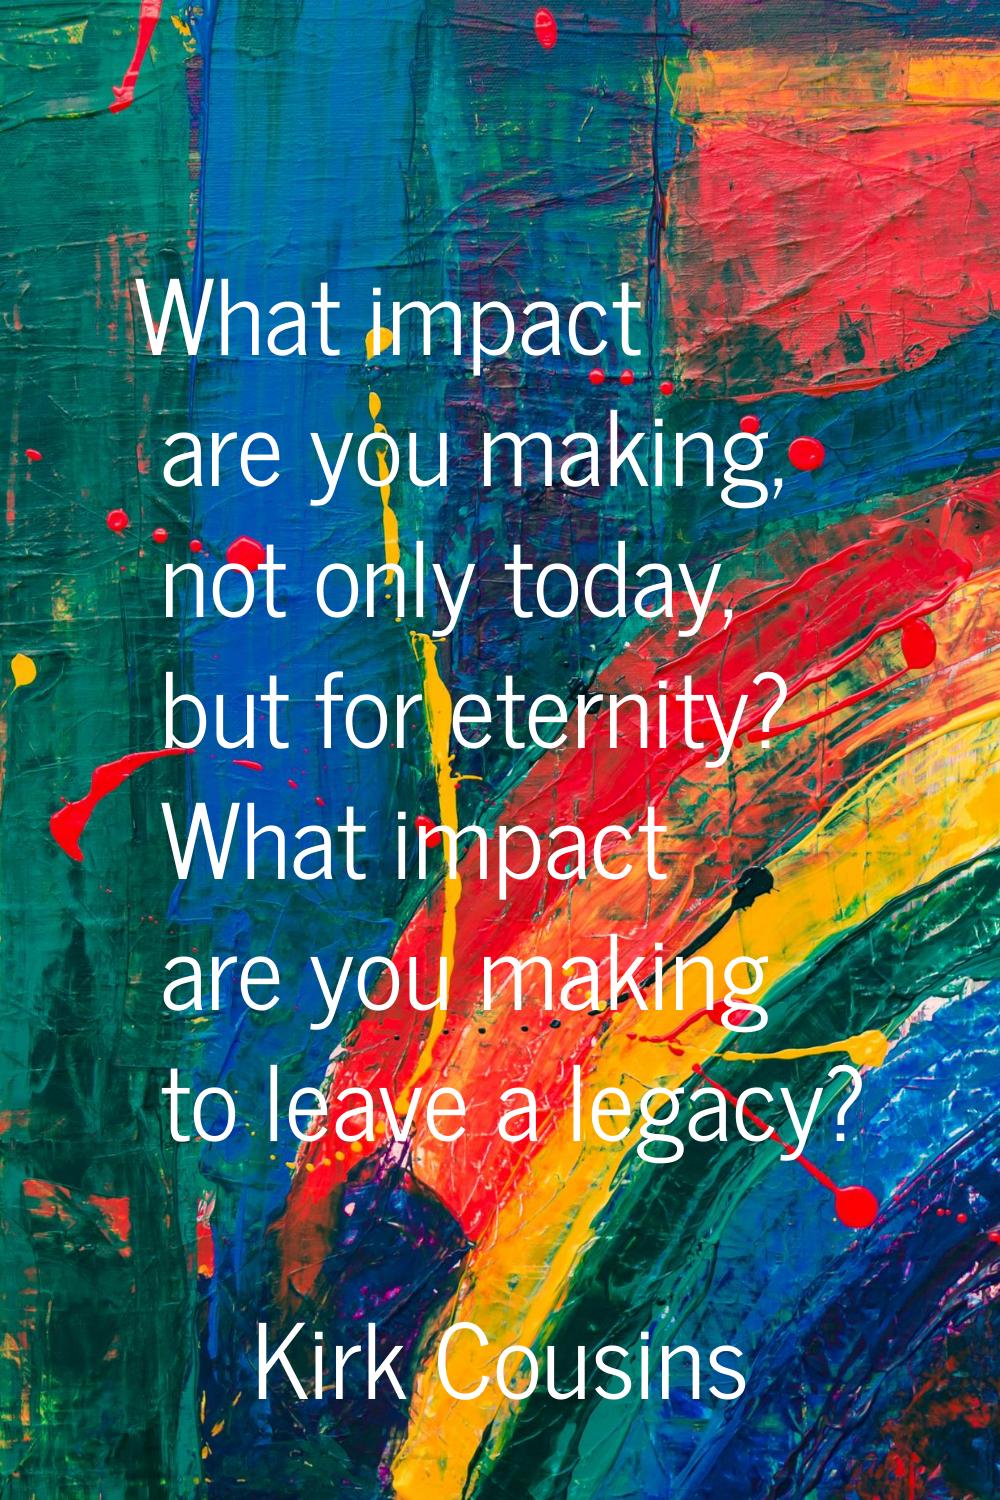 What impact are you making, not only today, but for eternity? What impact are you making to leave a